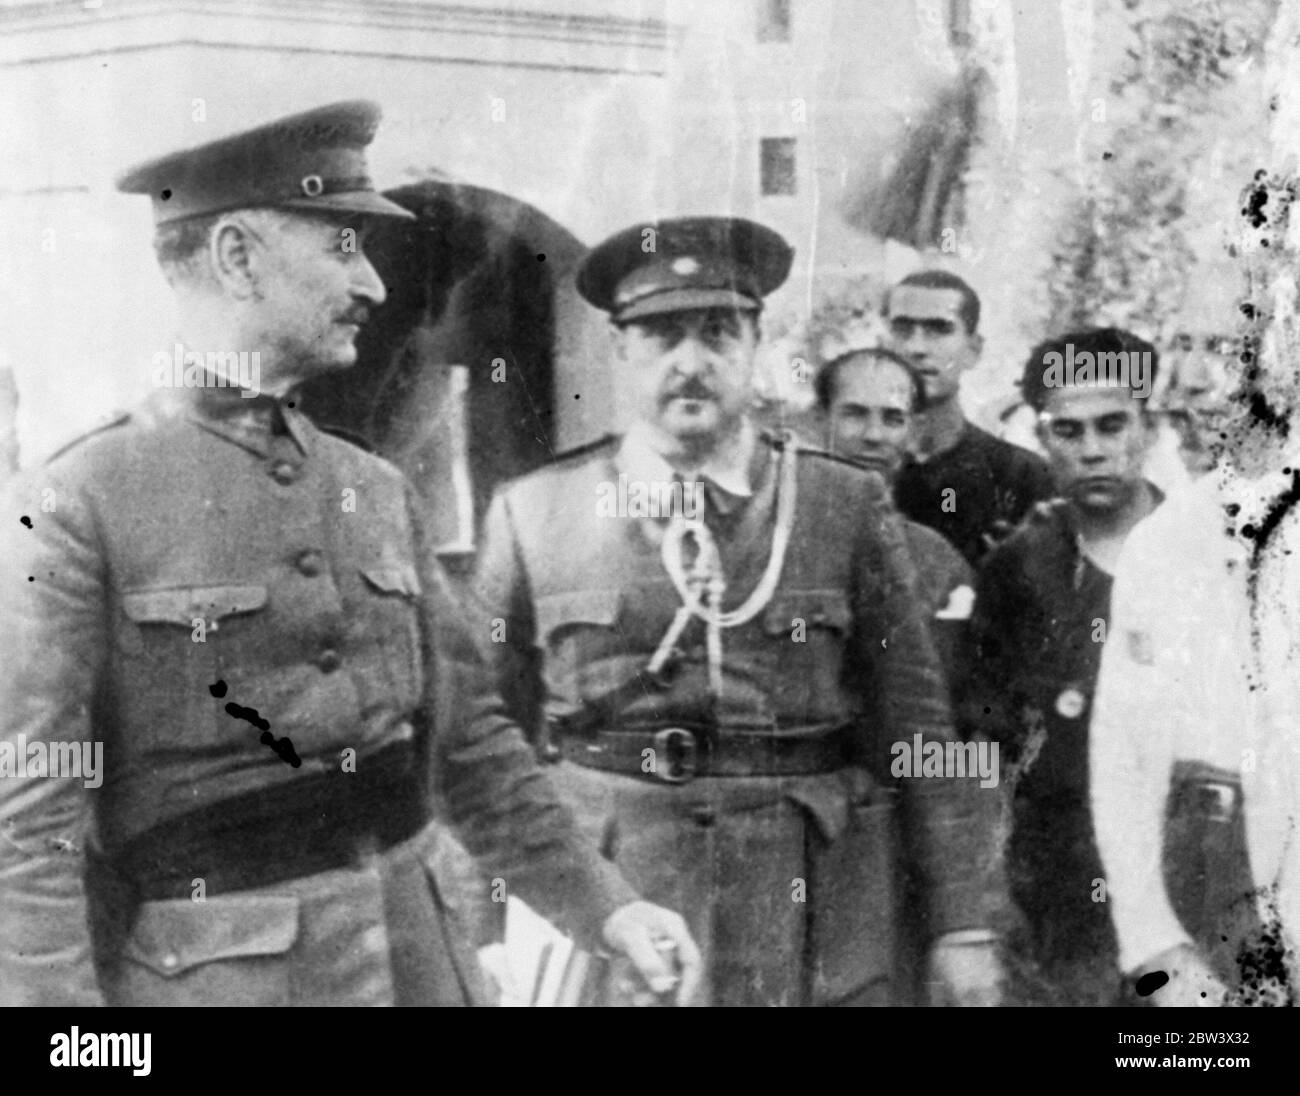 General De Llano Smiles - Rebel Chief Is Grim Photo shows : General Gonzalo Queipo de Llano , rebel commander in Seville ( left ) wears a smile that draws no response from his chief , General Franco ( centre ) at one of their meetings 25 Aug 1936 Original caption from negative Stock Photo